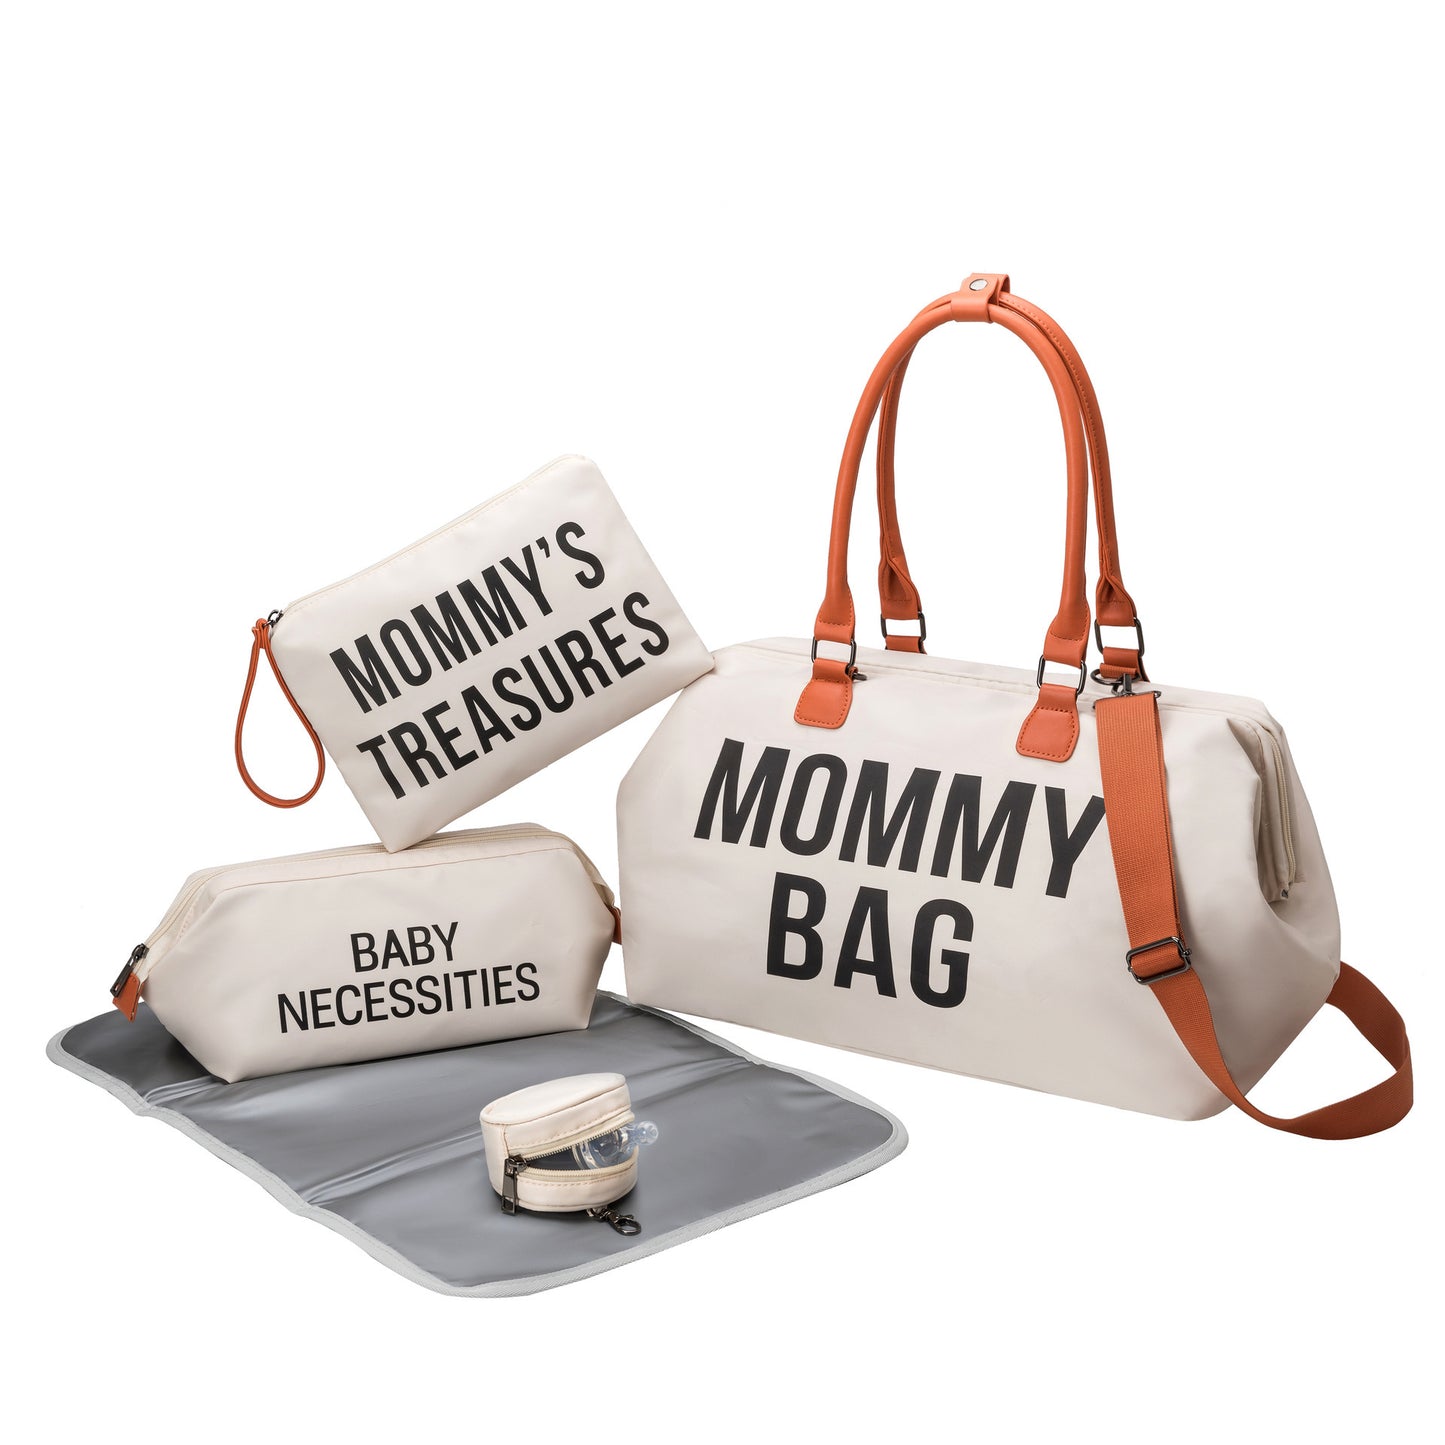 Three Piece Multifunctional And Large Capacity Mommy Bag